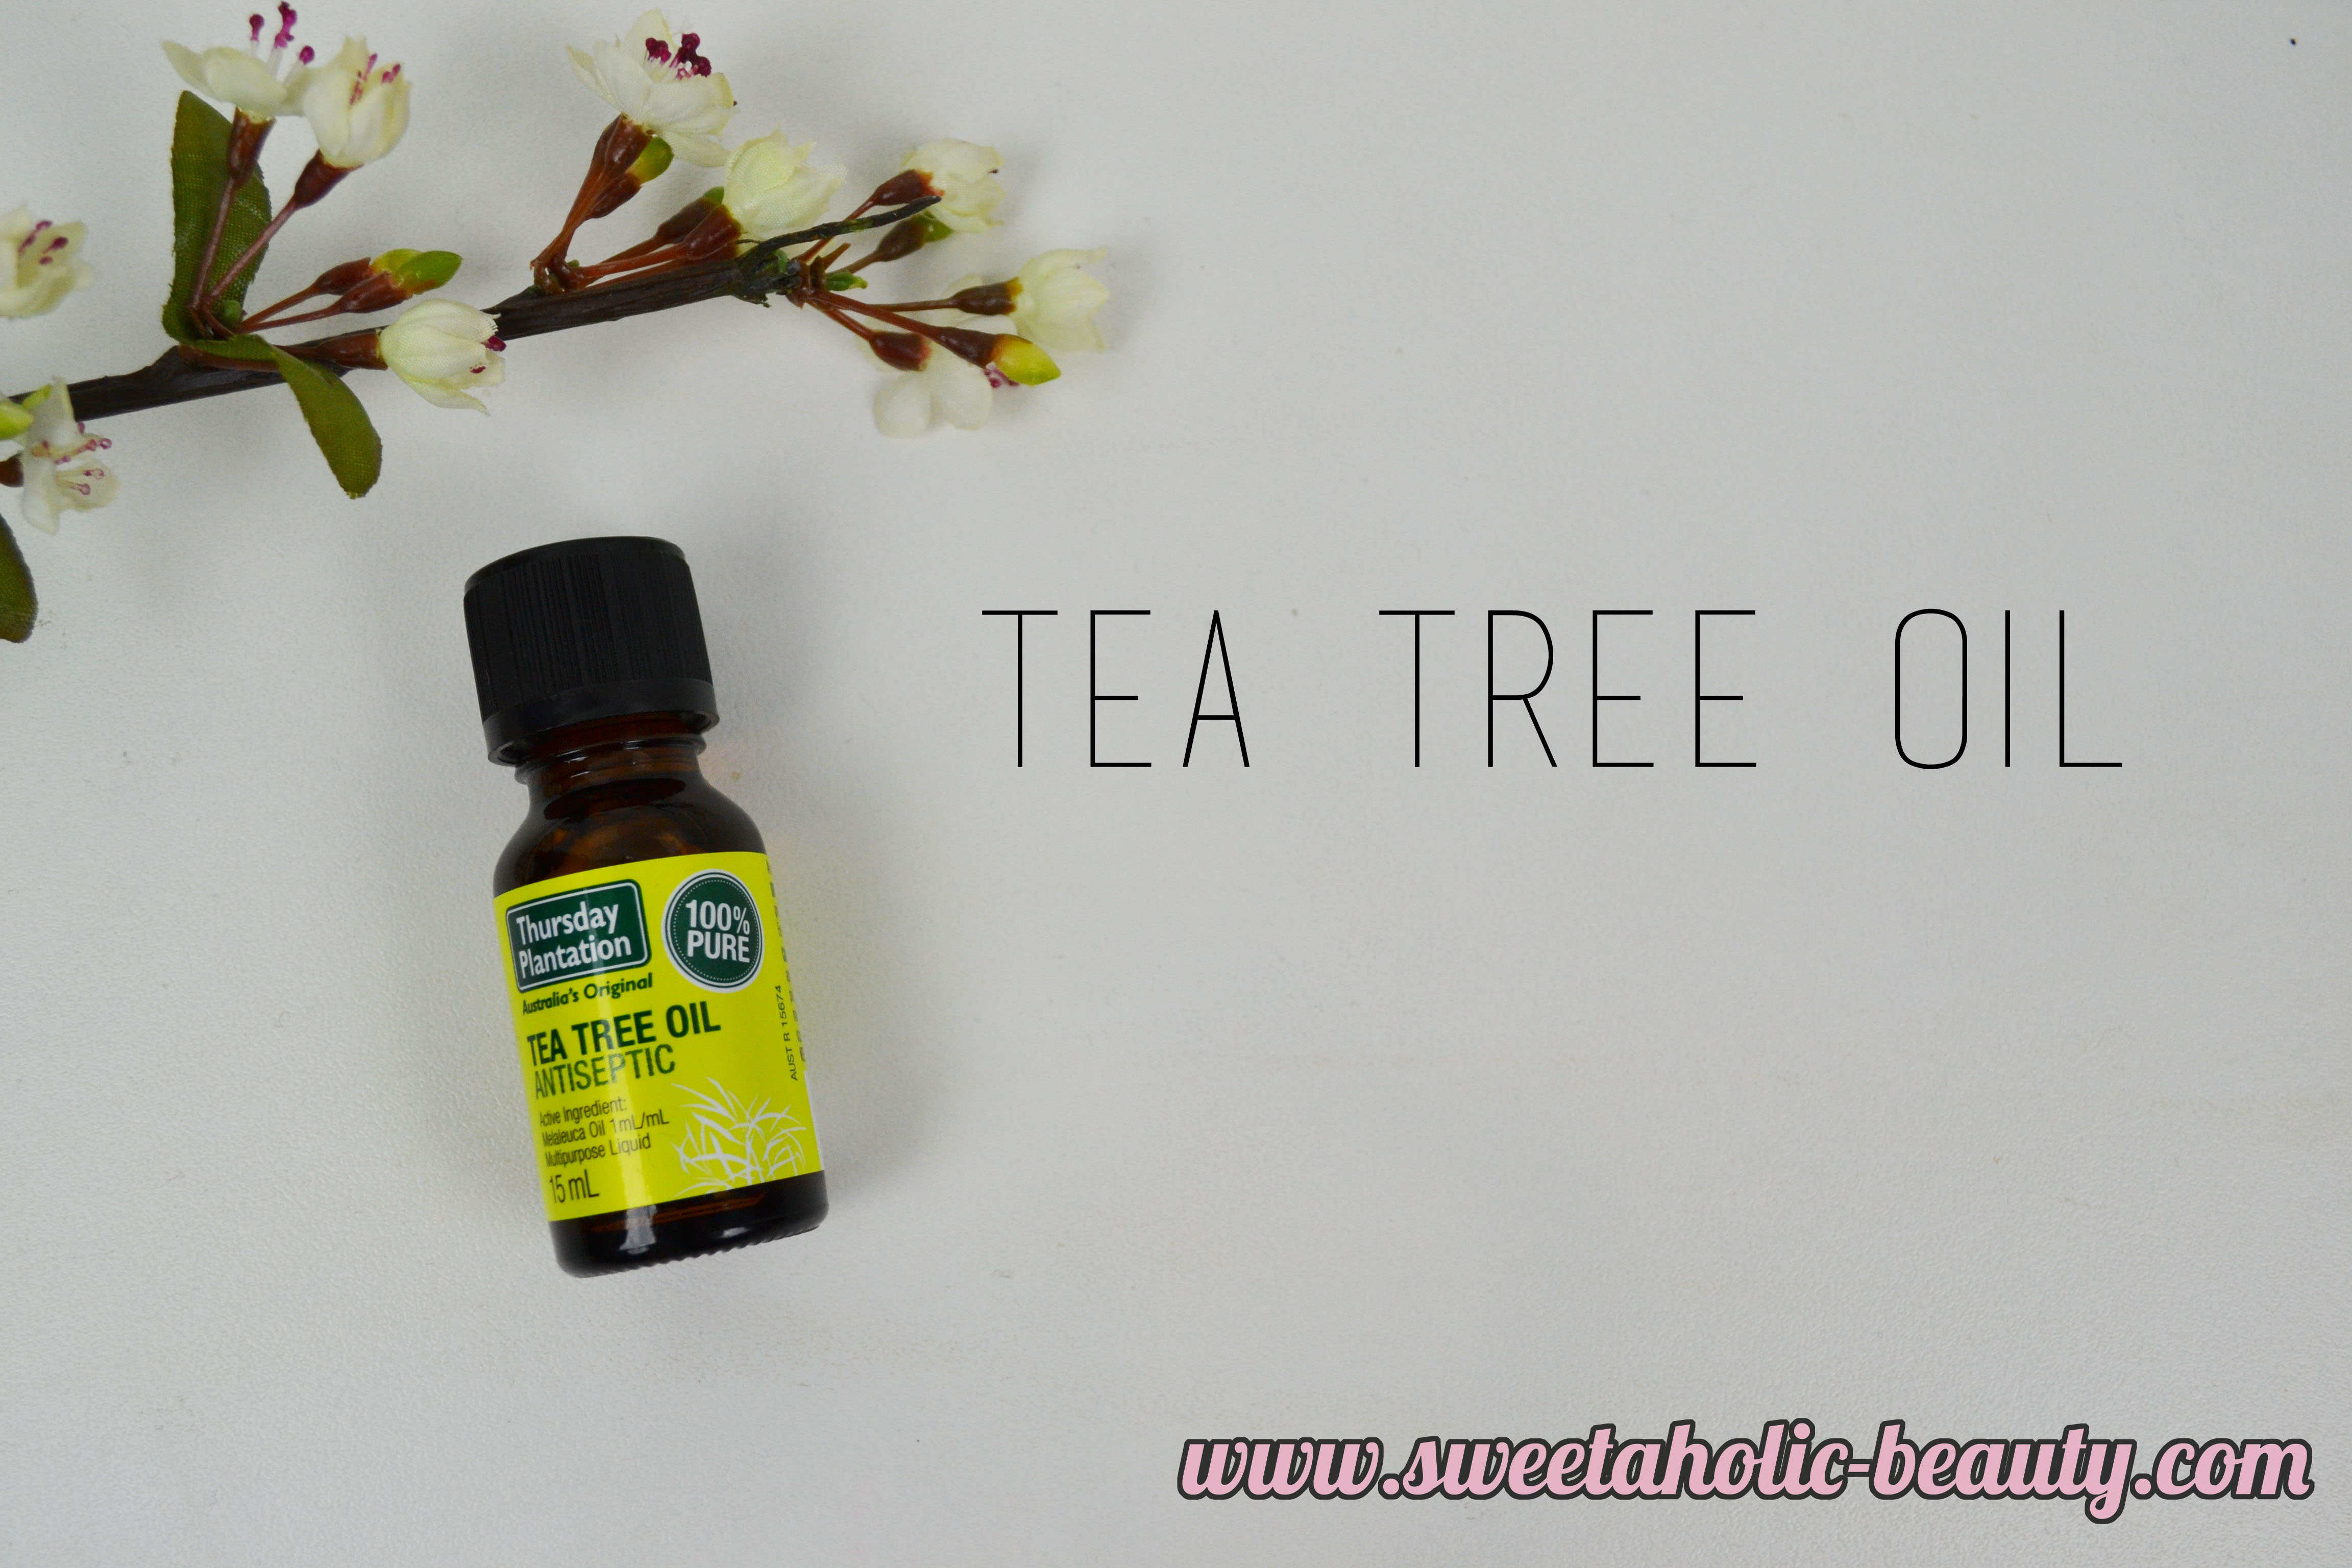 Blemish Busters, Acne, Skincare, Skin Problems, Bbloggers, Fixaderm, The Body Shop, Tea Tree, 